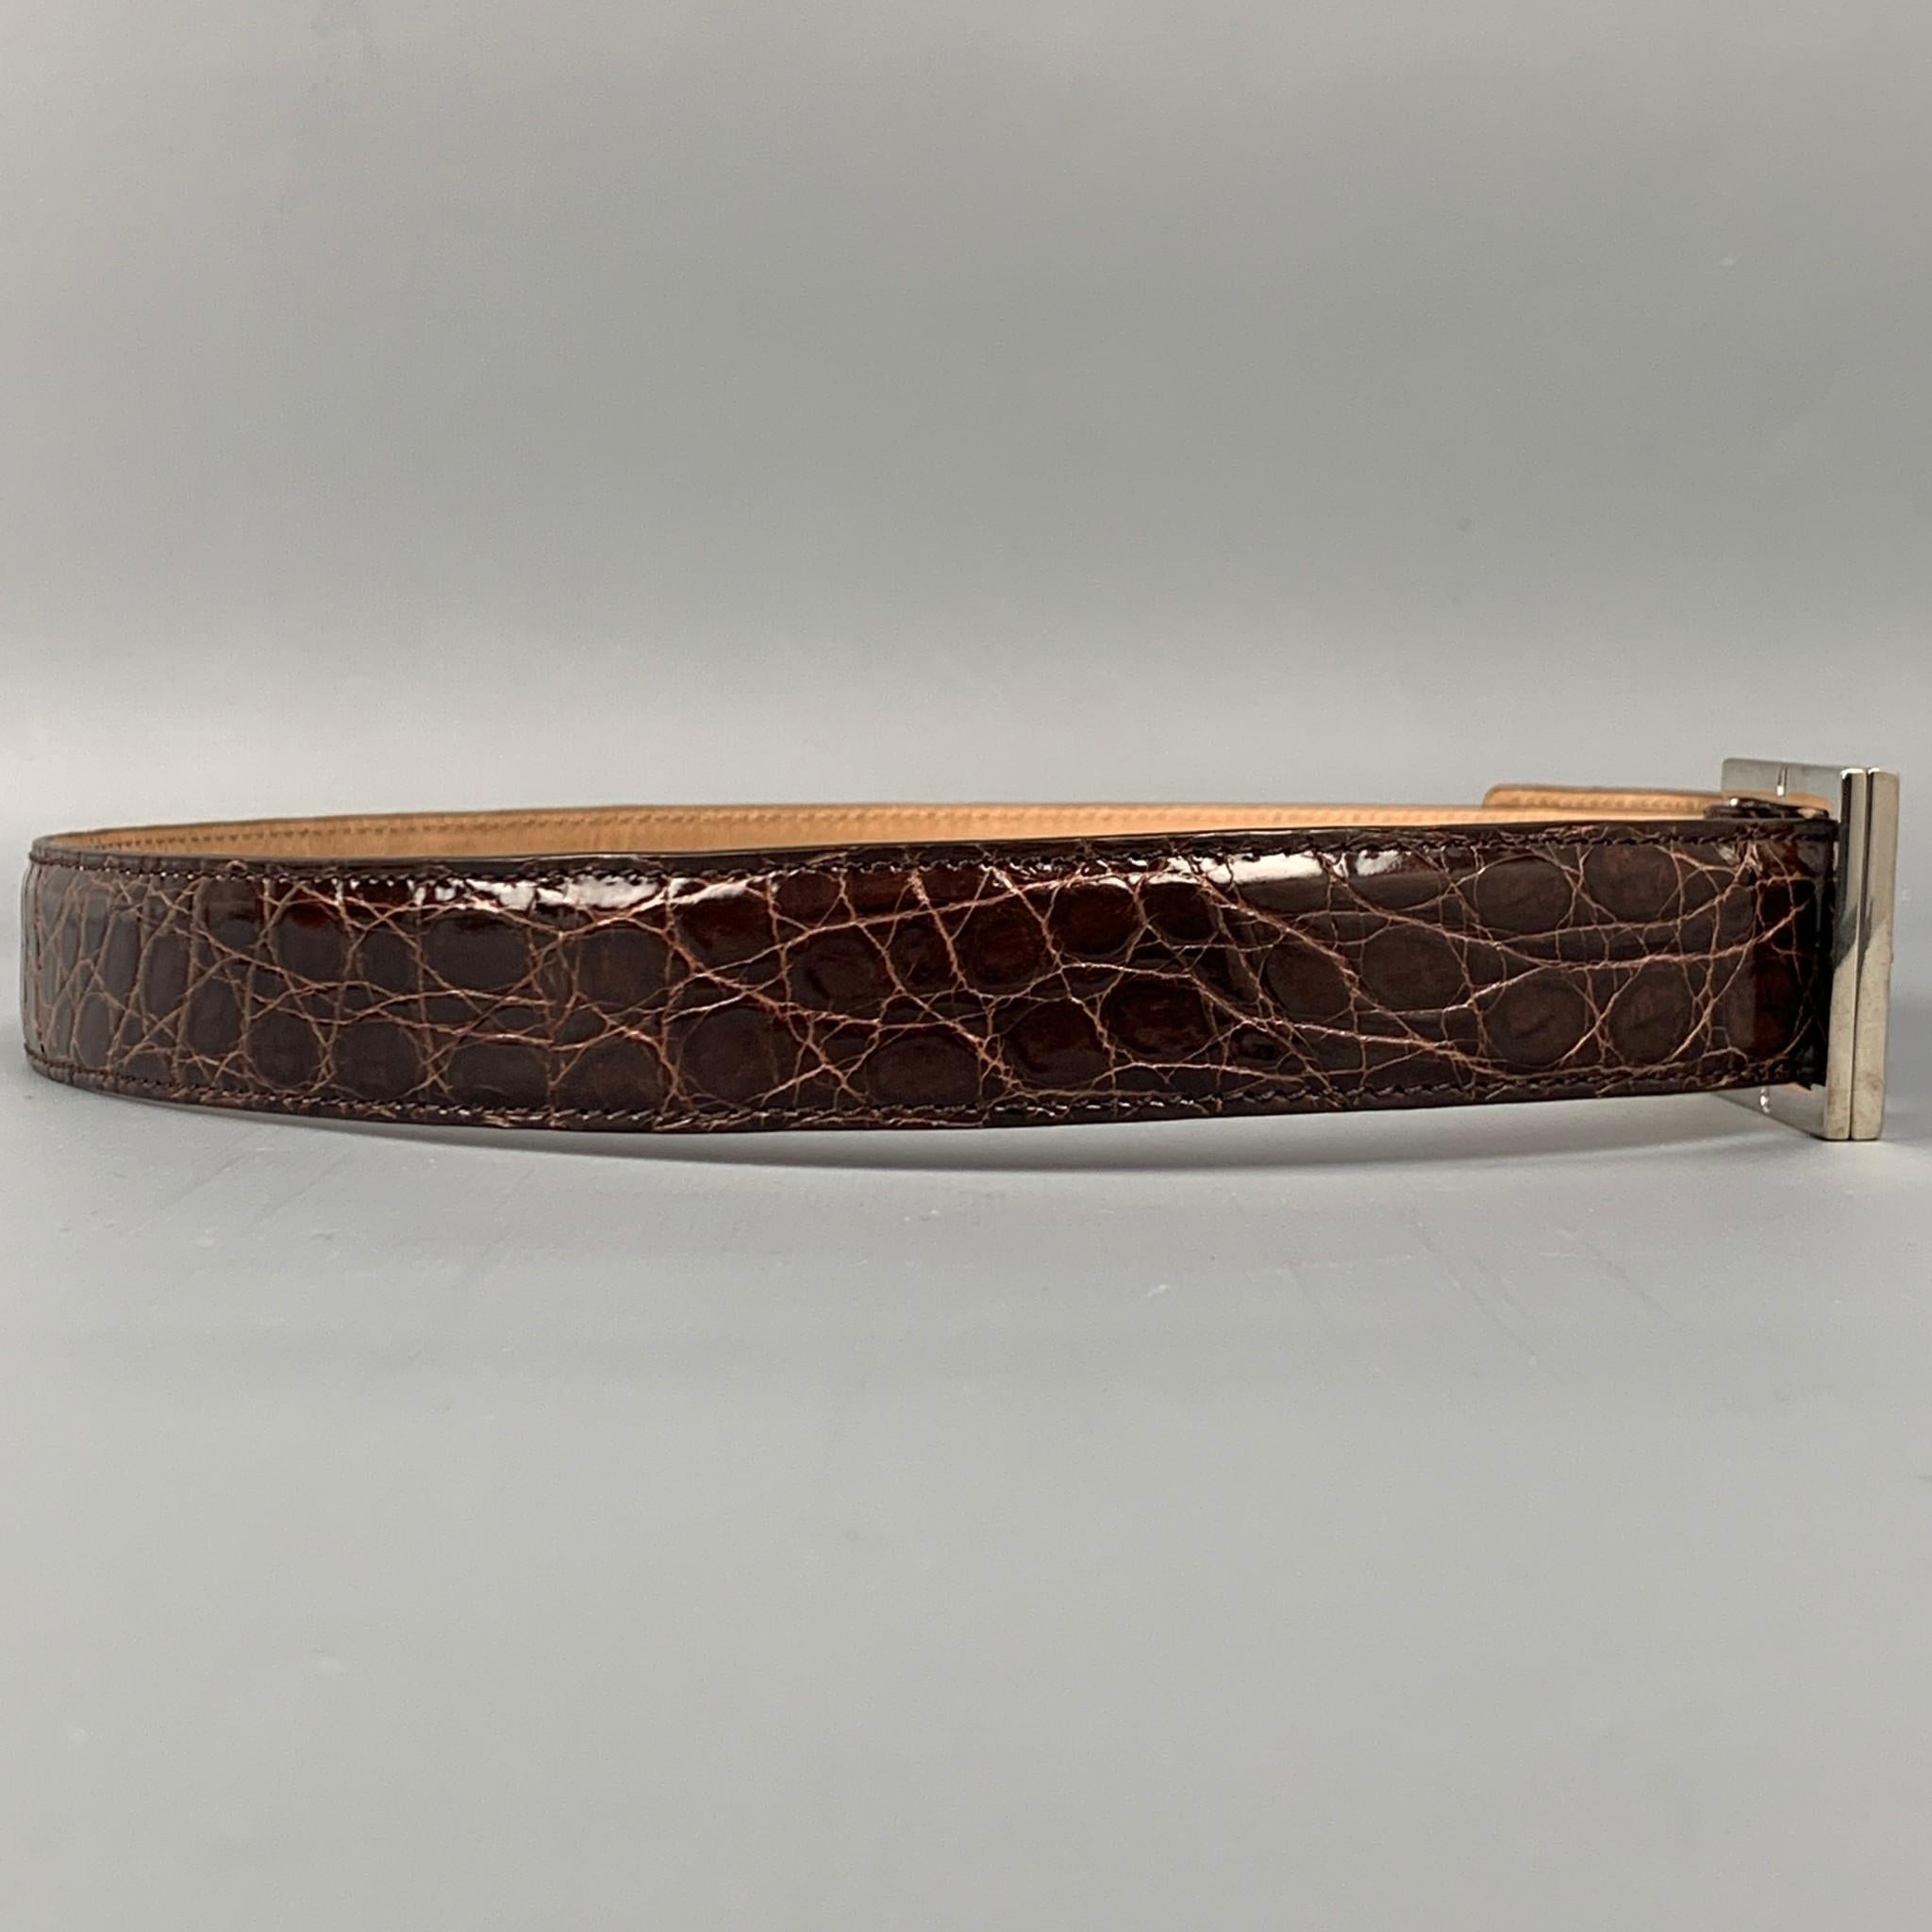 GUCCI belt comes in a brown alligator leather featuring a silver tone buckle closure. Made in Italy.

Very Good Pre-Owned Condition.
Marked: 223901-1766-85-34

Length: 40 in.
Width: 1.25 in.
Fits: 32 in. - 36 in.
Buckle: 1.5 in. 